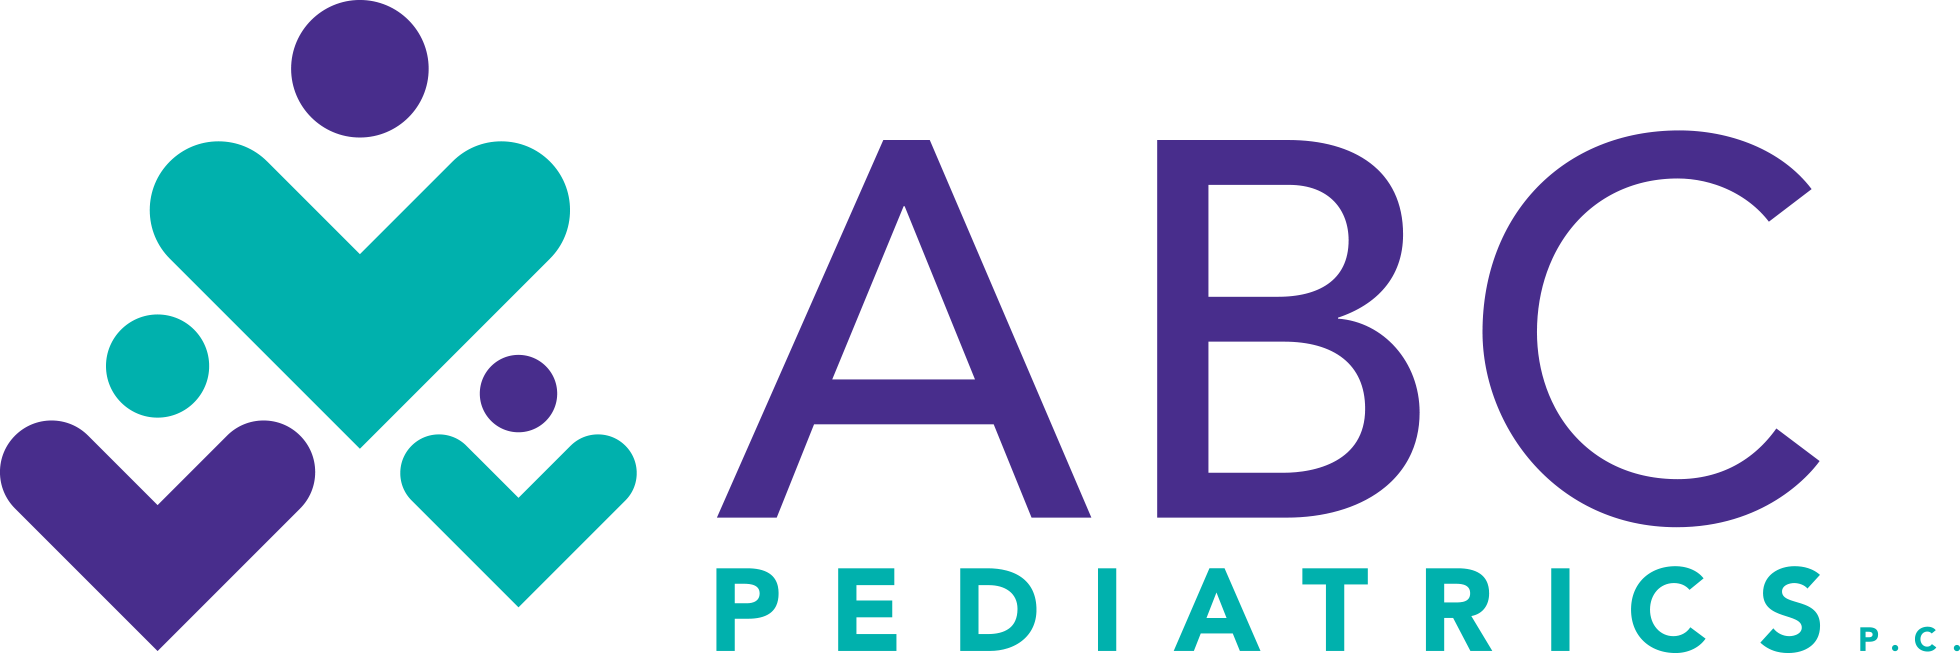 ABC Pediatrics Takes On a New Look and New Offices ROIDESIGN